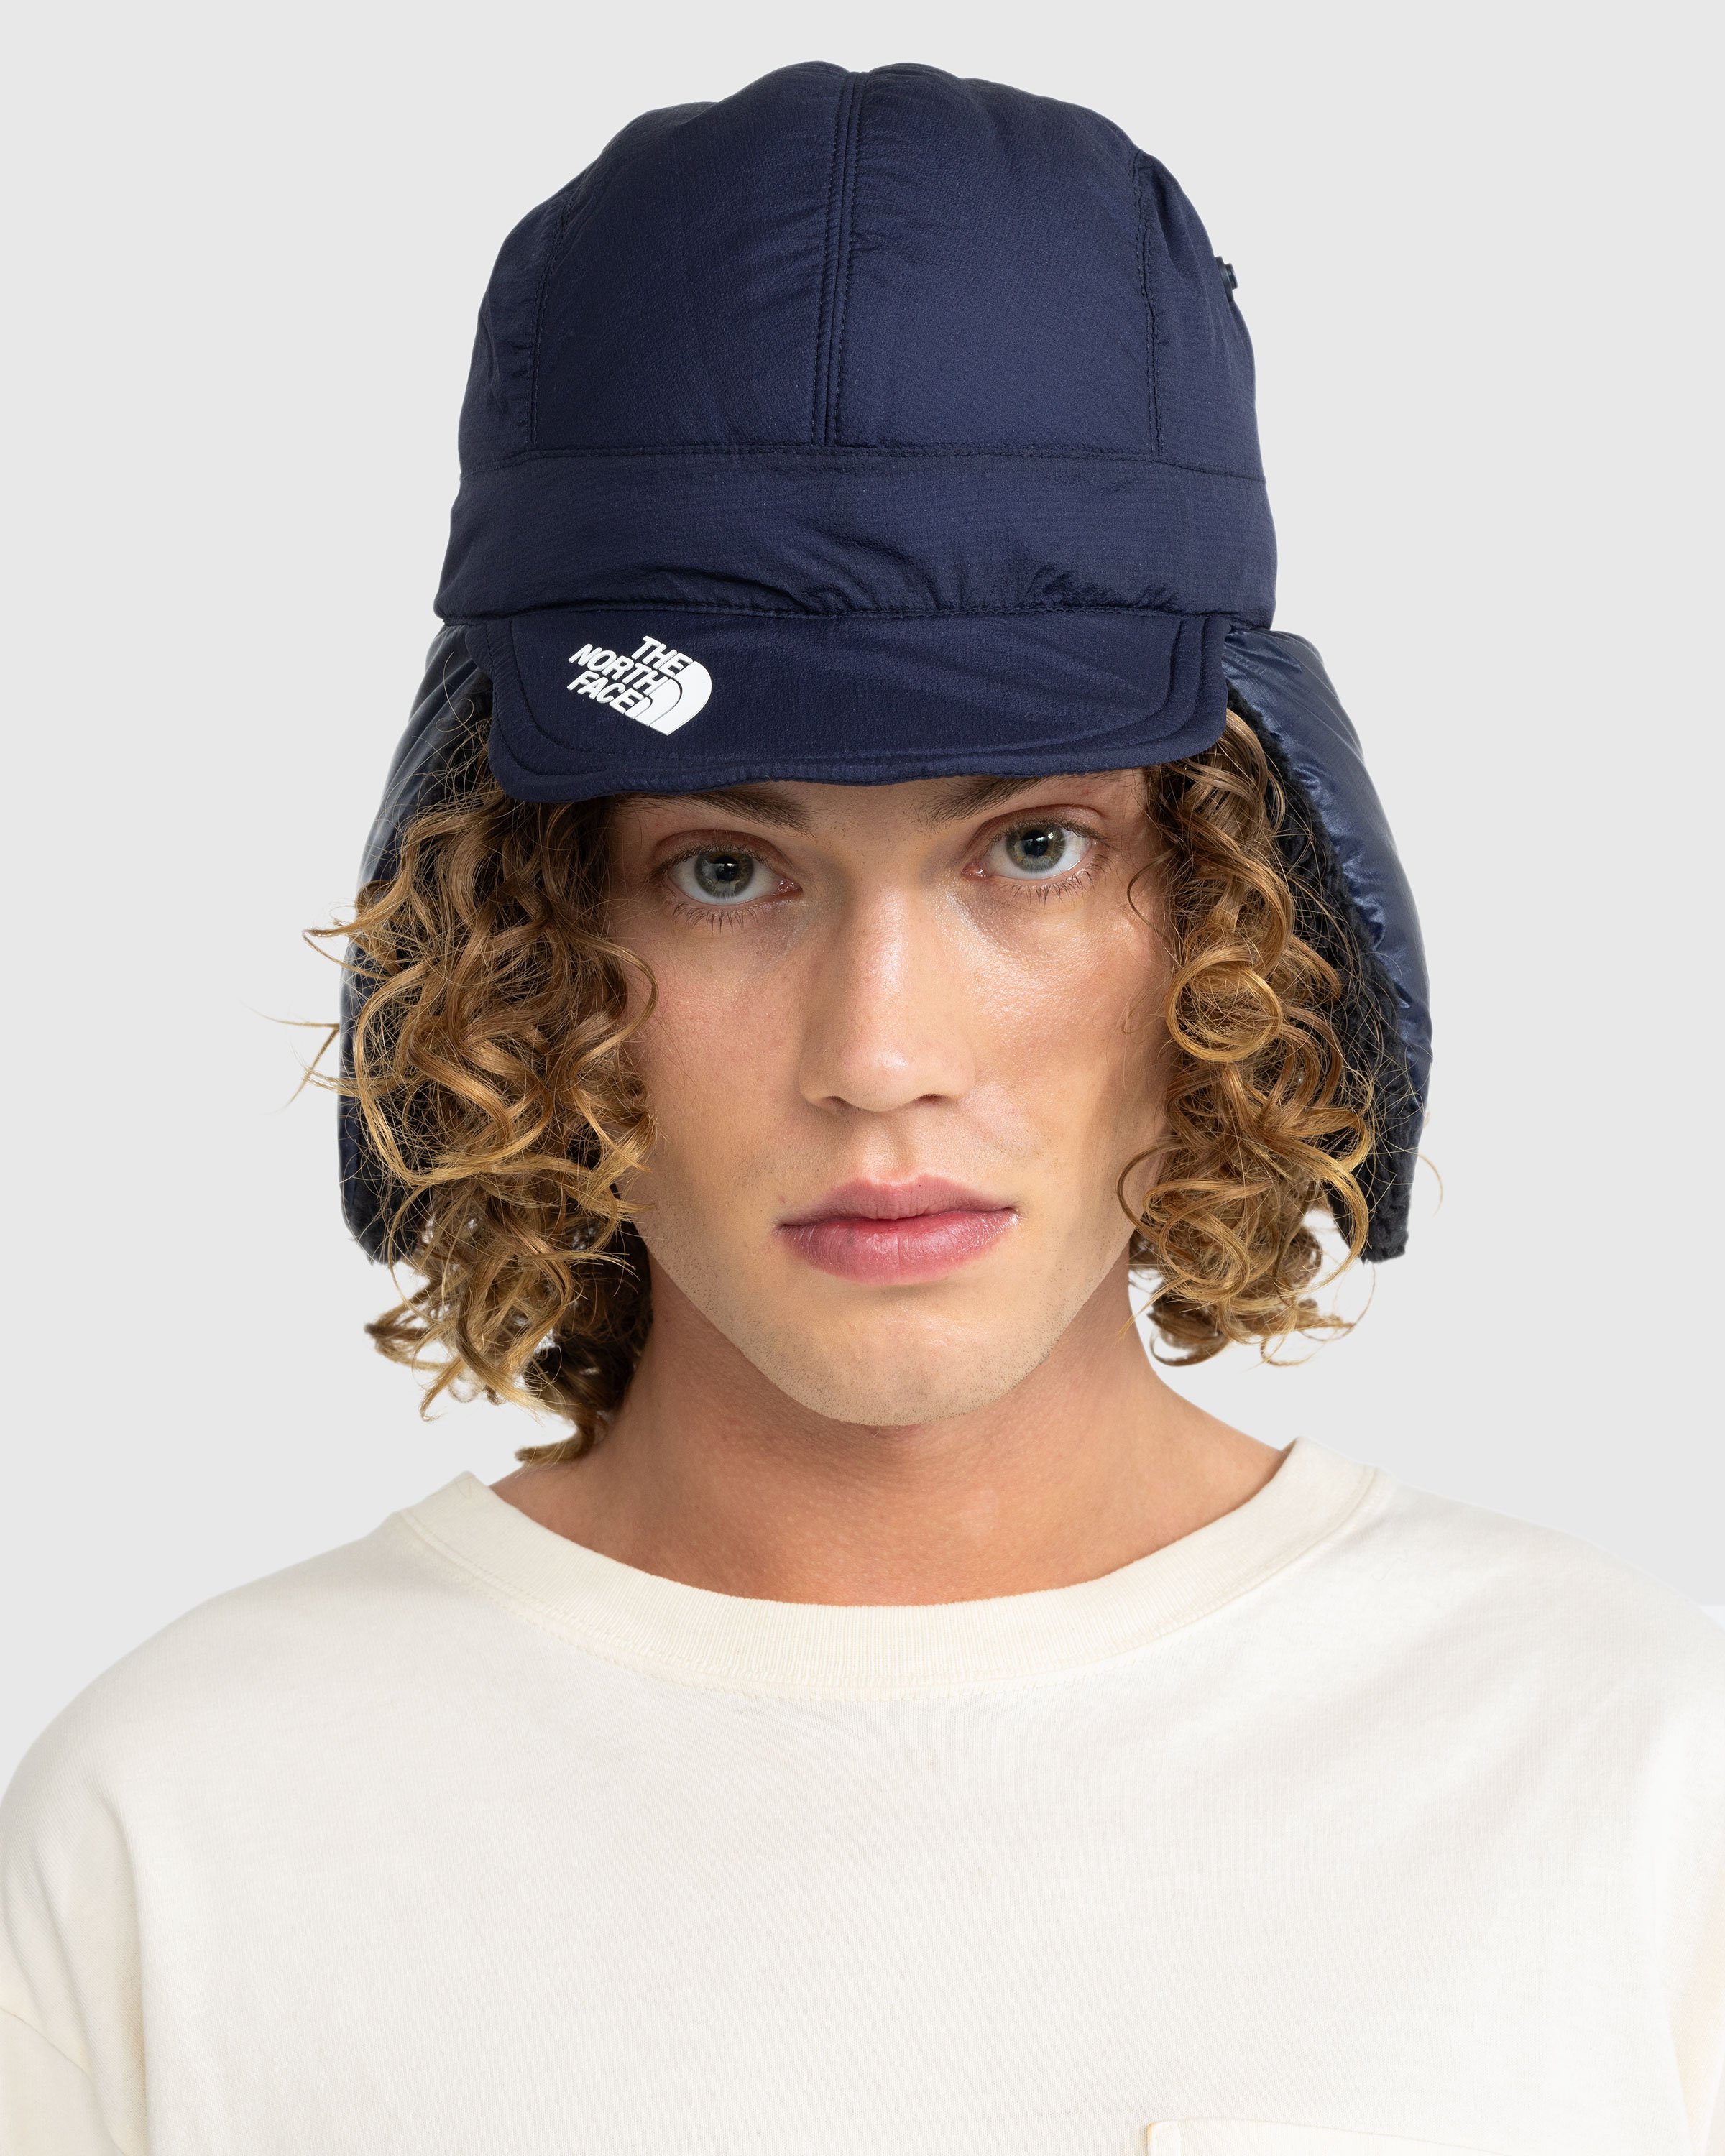 Utility fisherman hat, The North Face, Shop Women's Hats Online